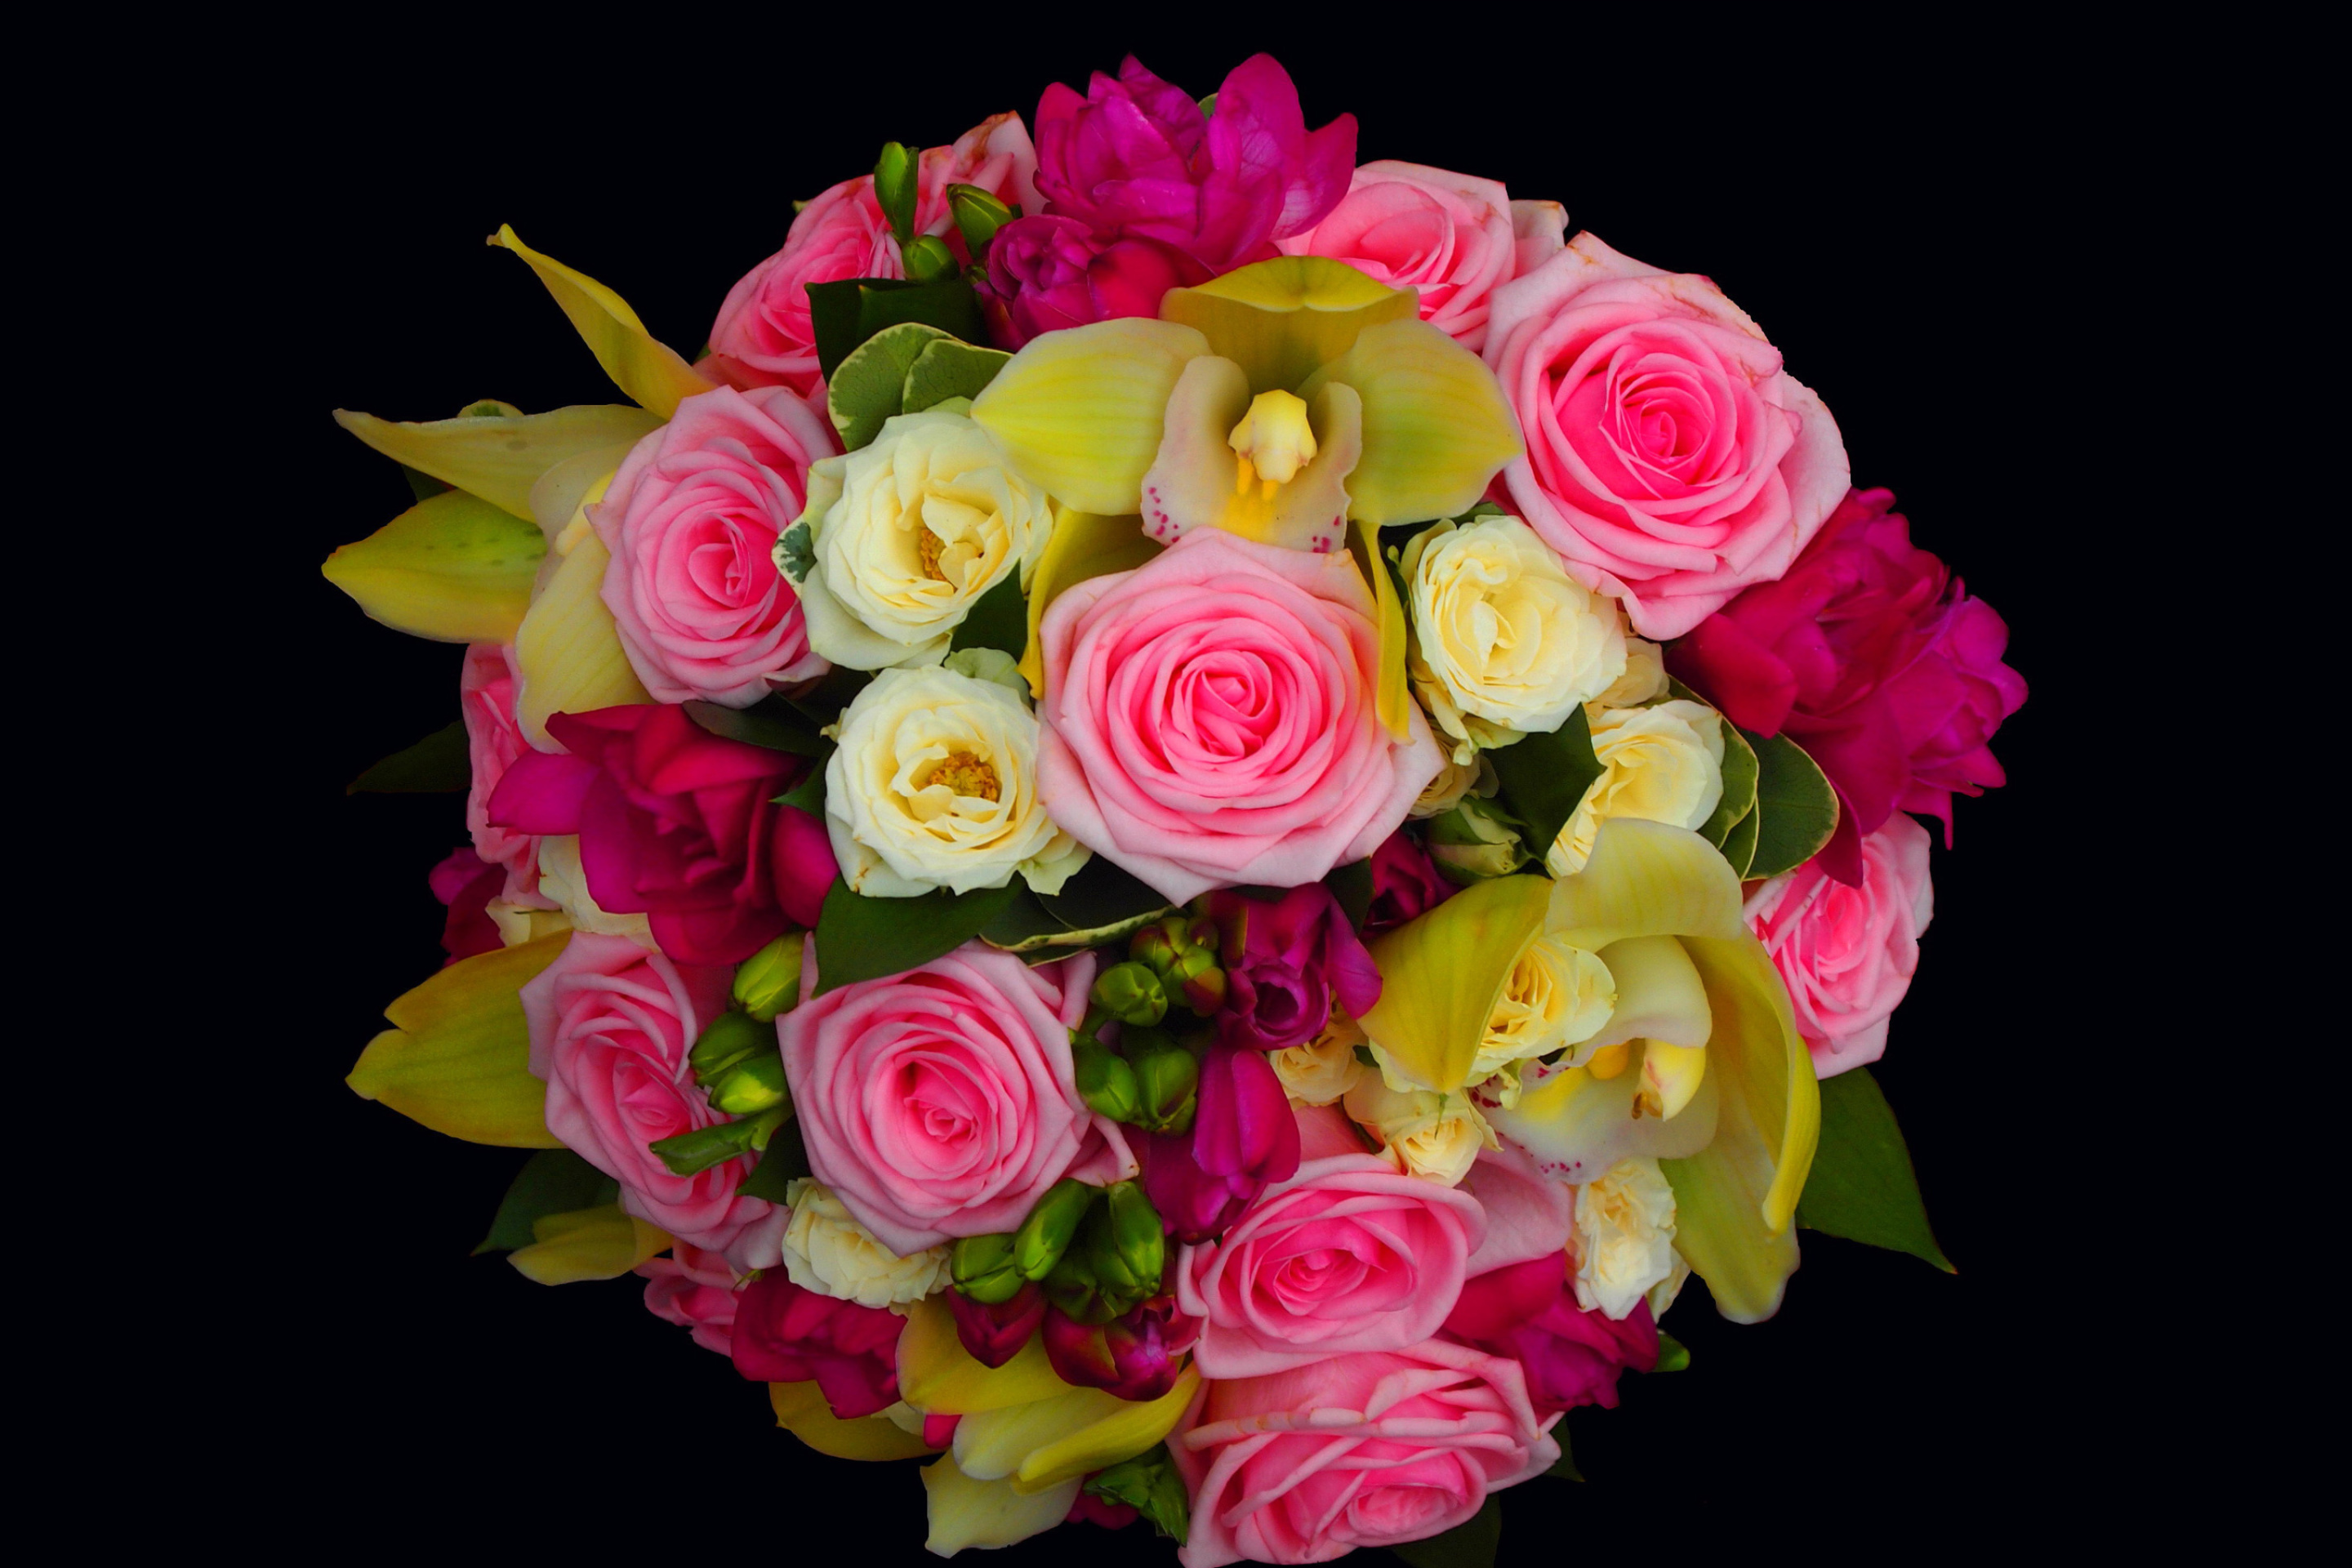 Bouquet of roses and yellow orchid, floristry screenshot #1 2880x1920